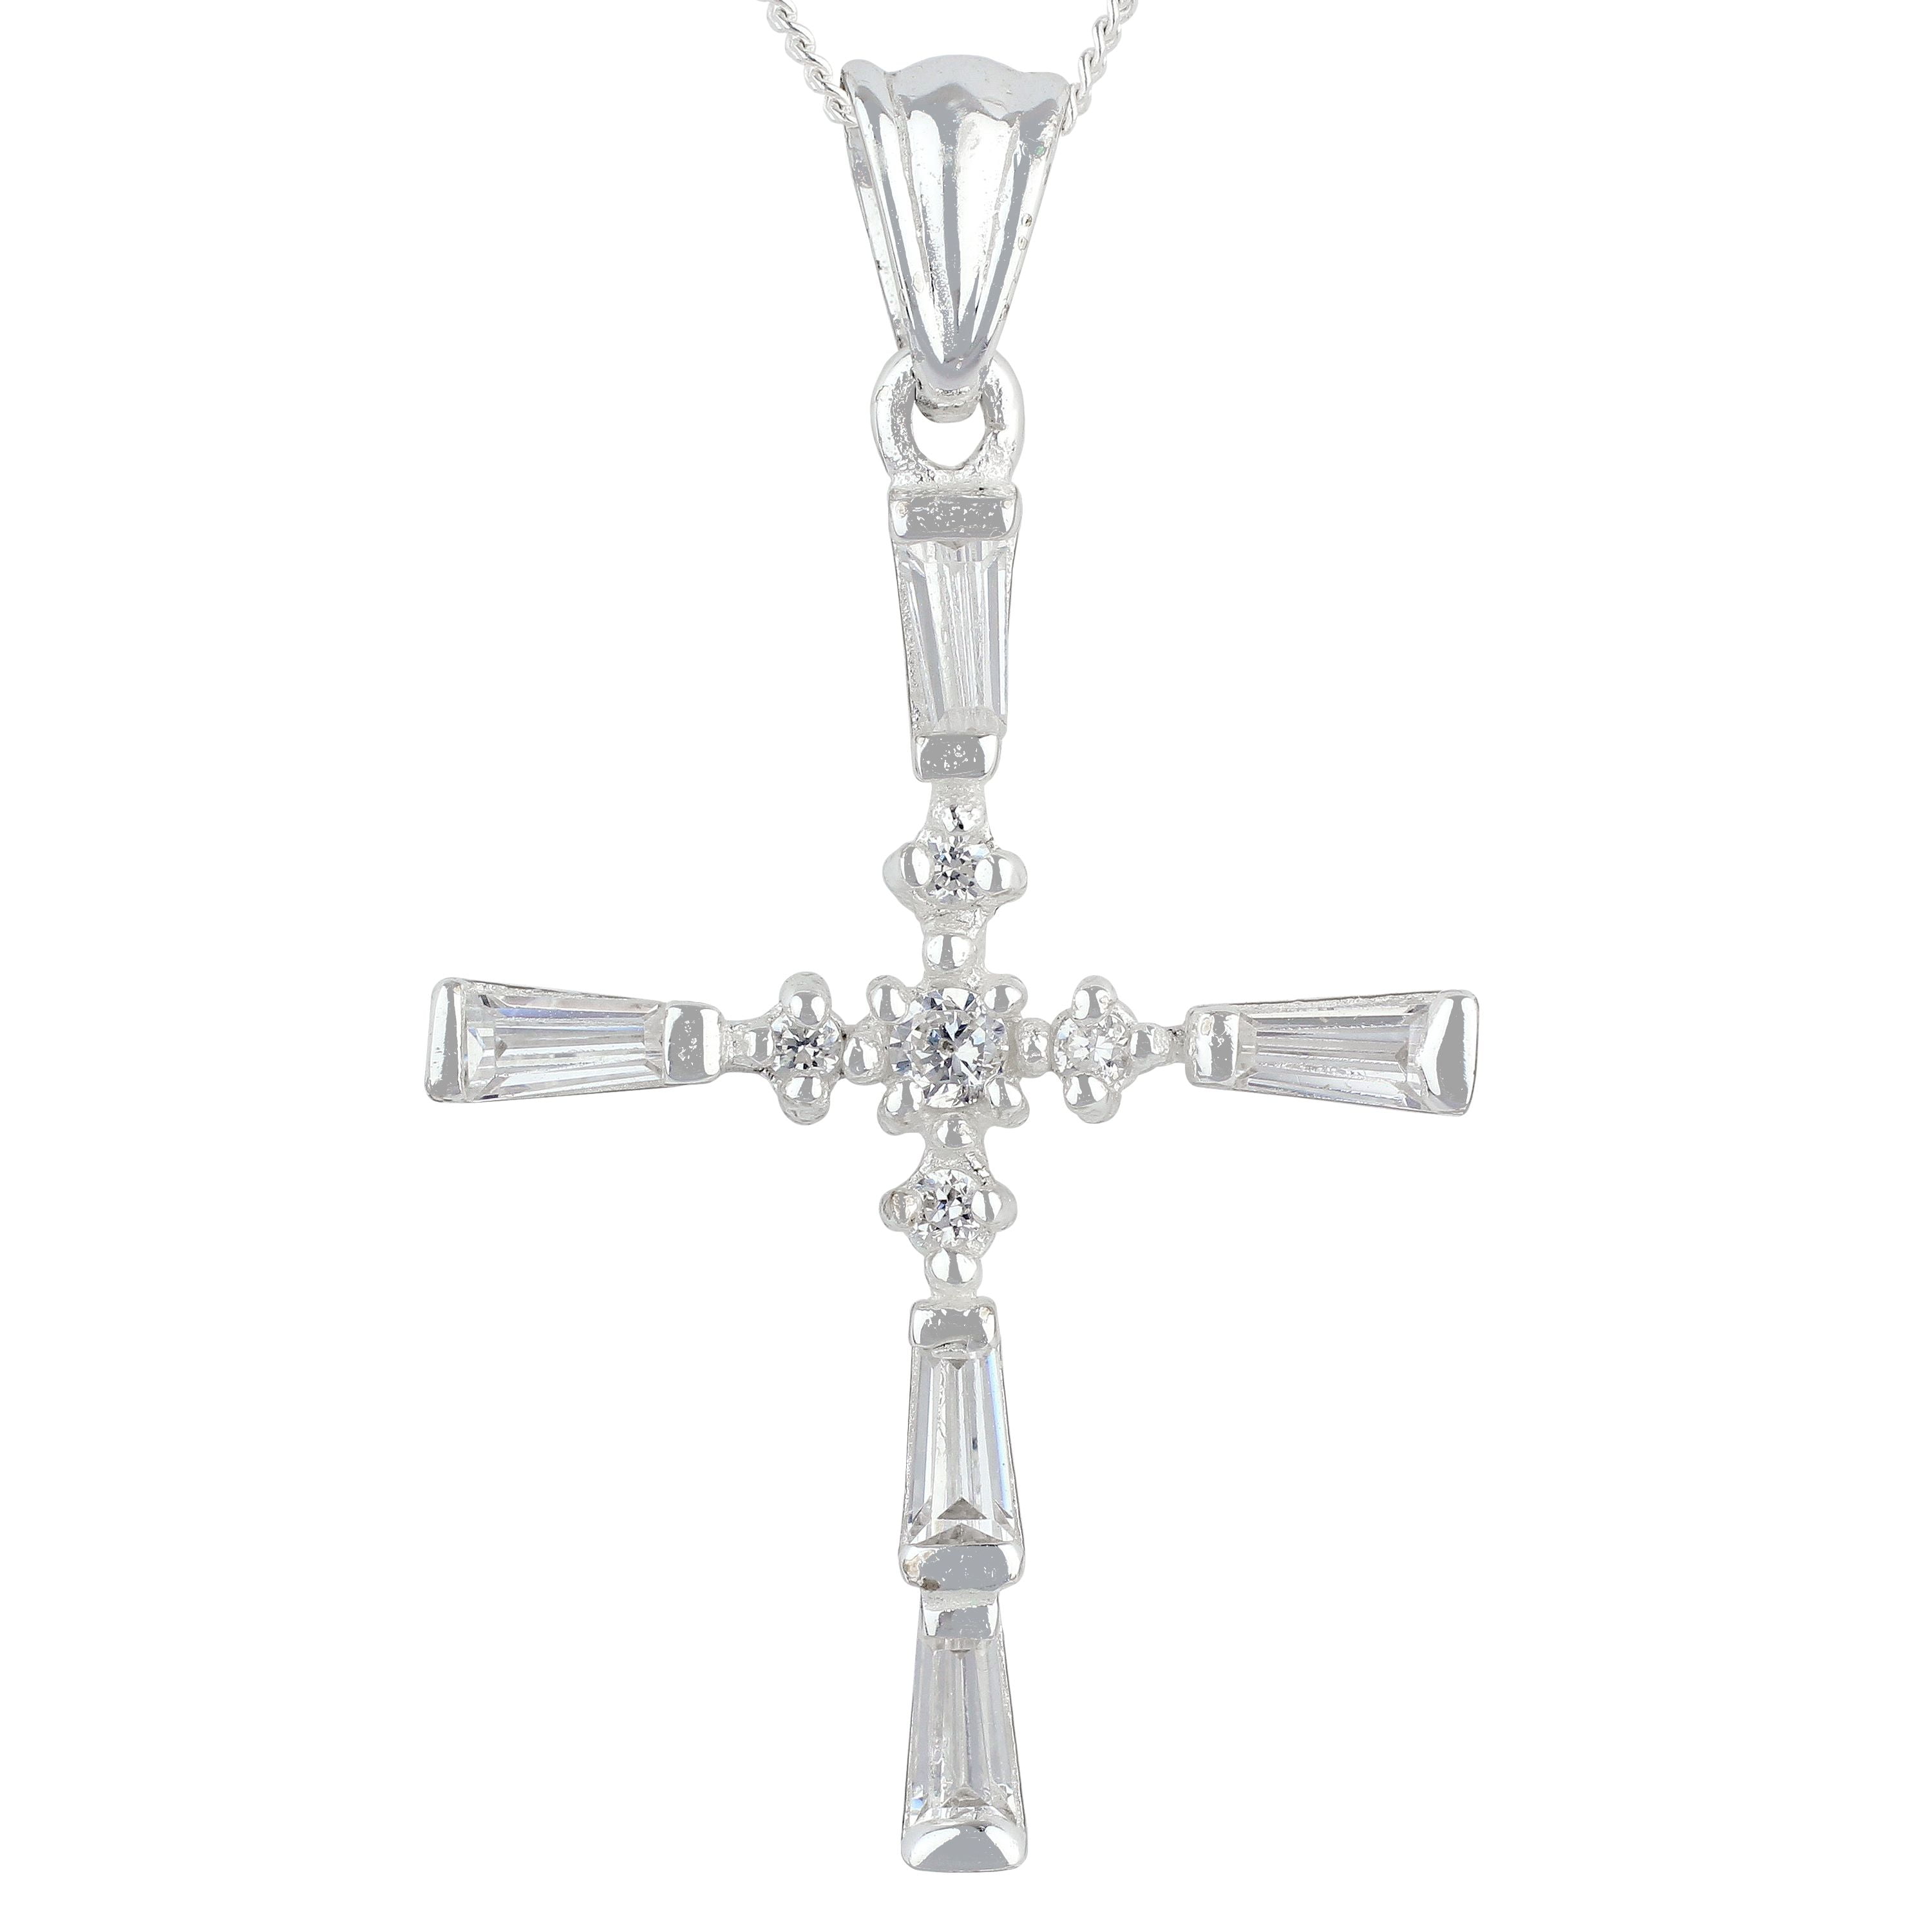 Diamond Simulated Cross Pendant Necklace Chain 925 Sterling Silver Filled 20"